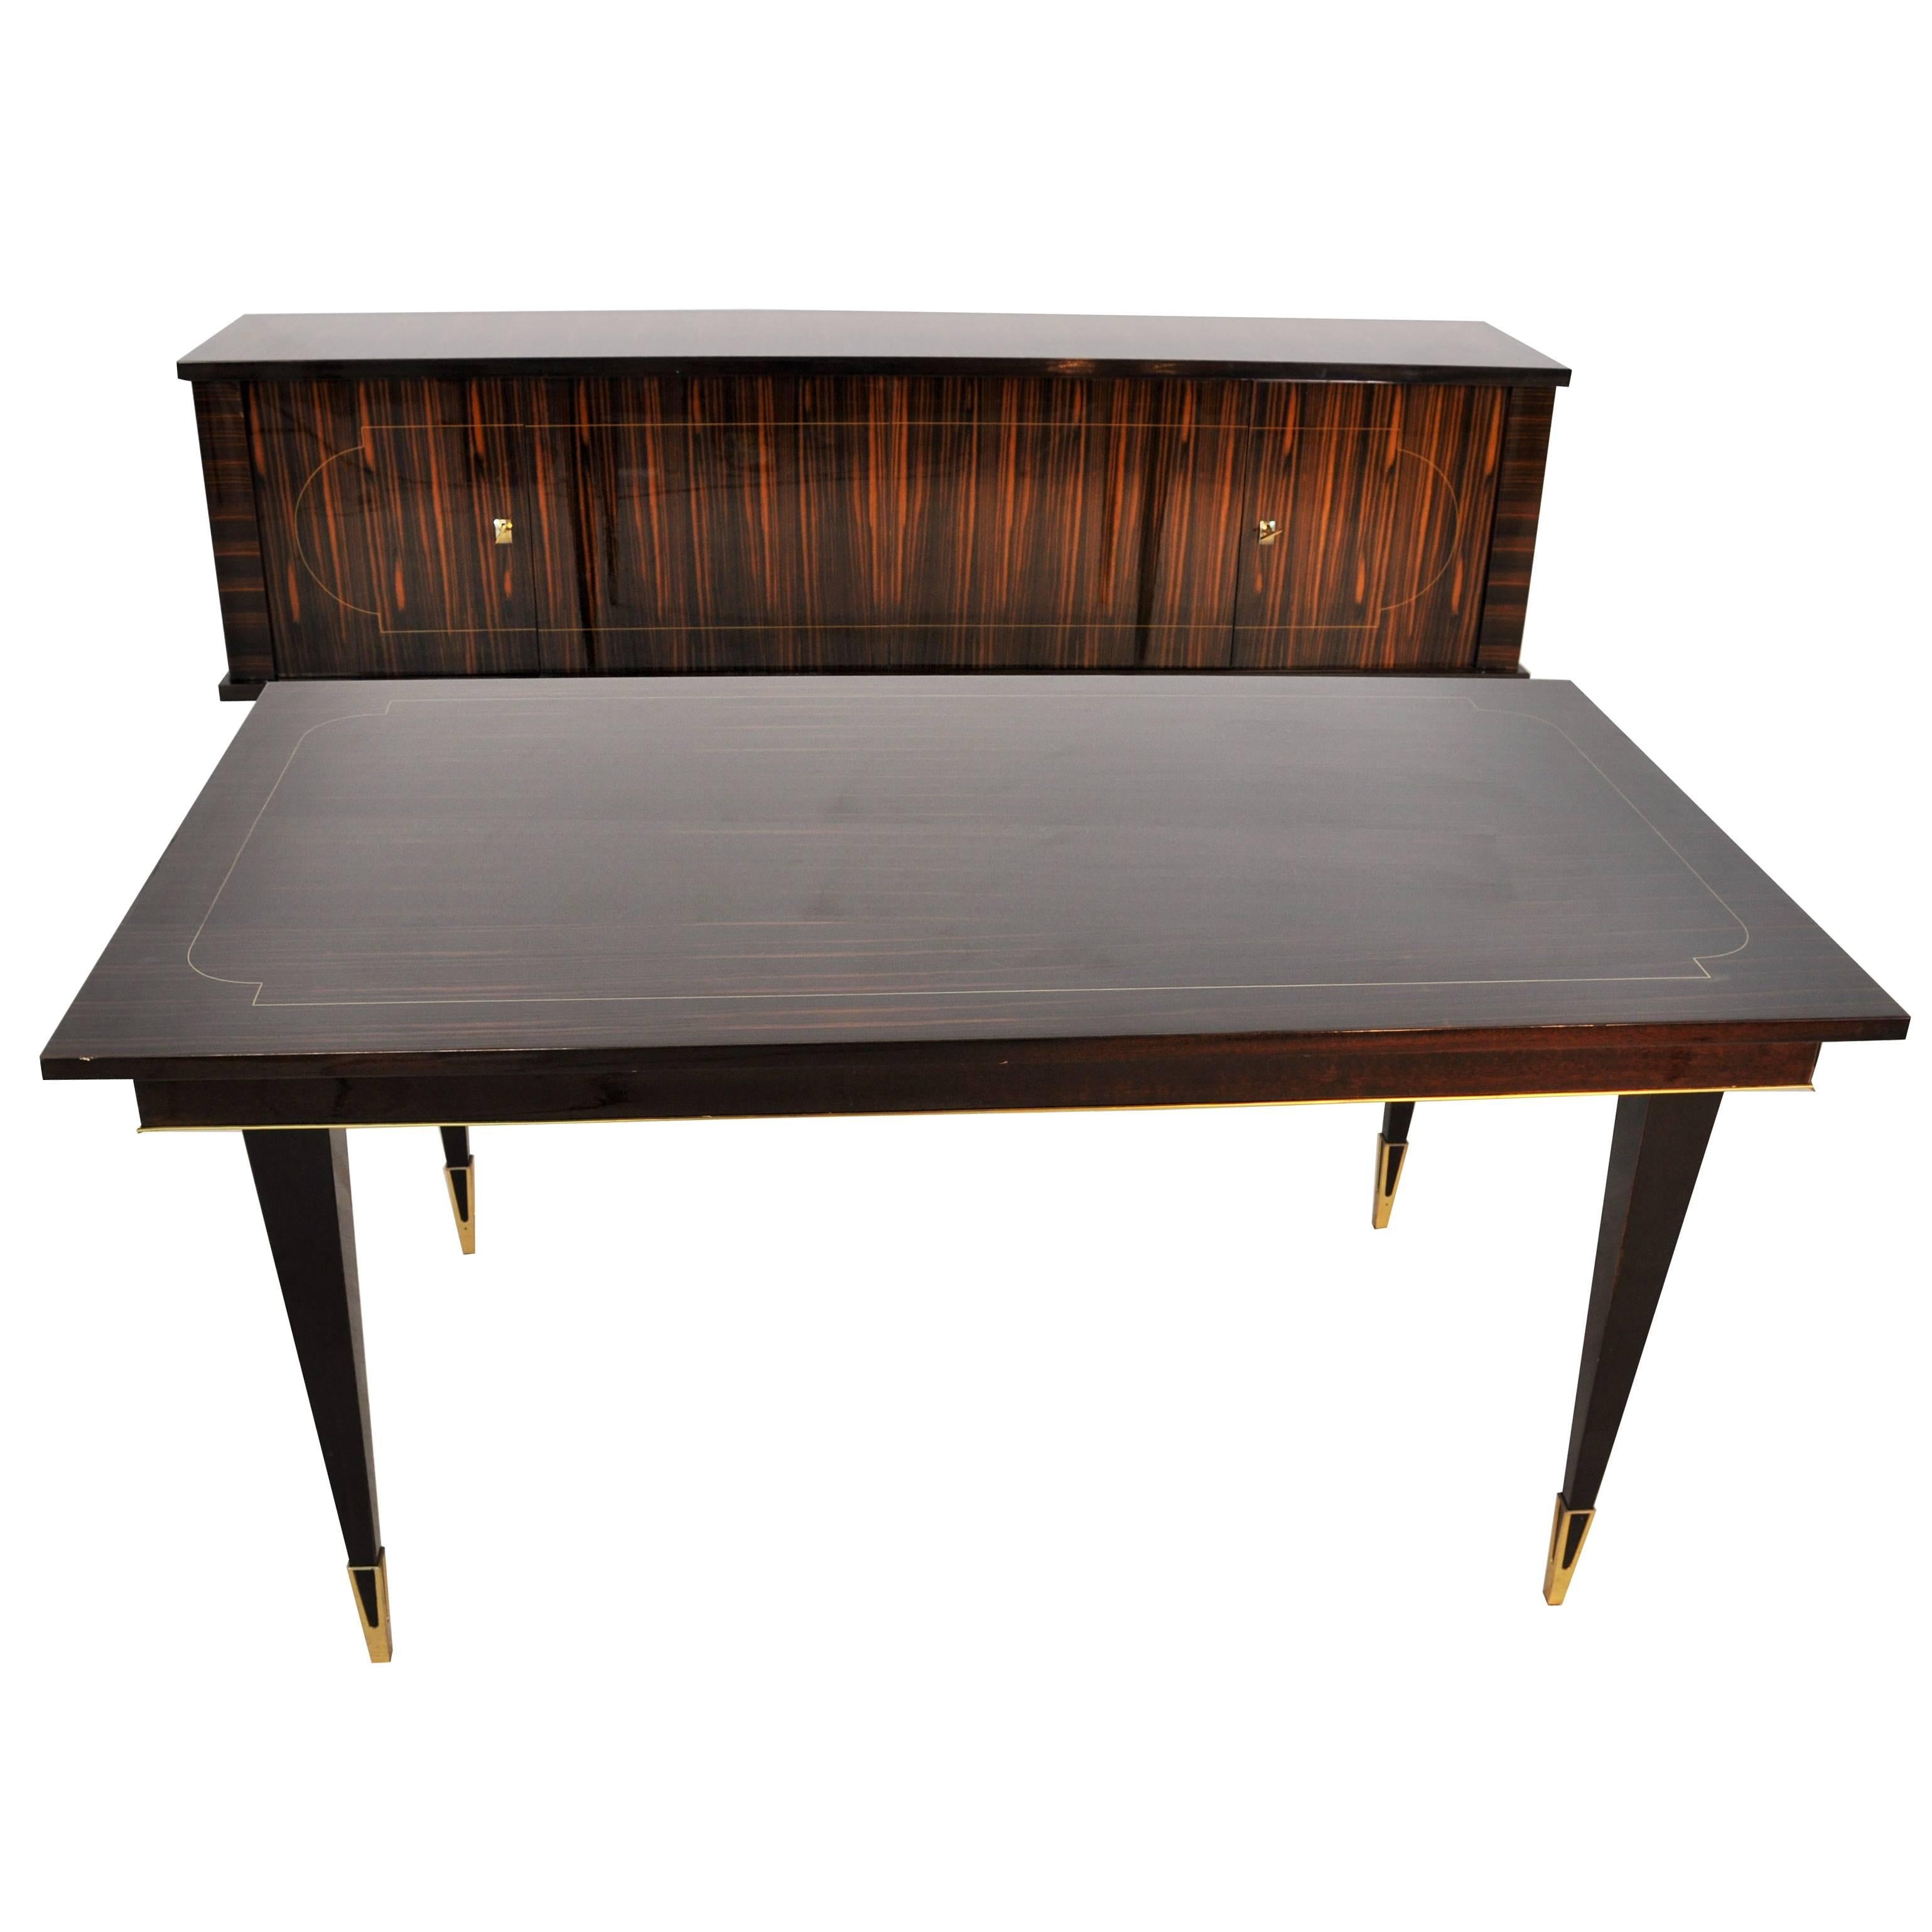 French Art Deco Macassar Dining Table with Brass Feets